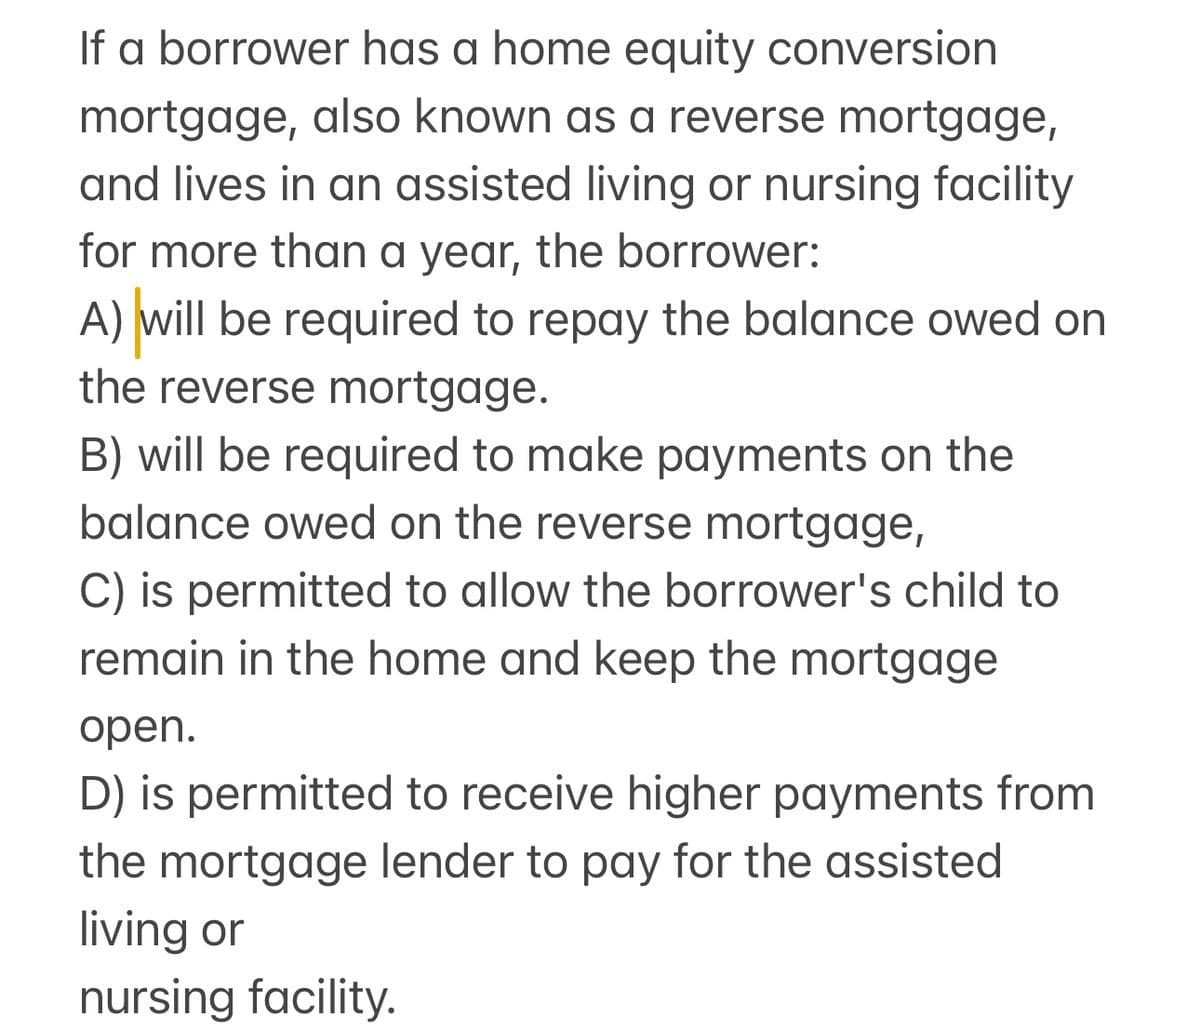 If a borrower has a home equity conversion
mortgage, also known as a reverse mortgage,
and lives in an assisted living or nursing facility
for more than a year, the borrower:
A) will be required to repay the balance owed on
the reverse mortgage.
B) will be required to make payments on the
balance owed on the reverse mortgage,
C) is permitted to allow the borrower's child to
remain in the home and keep the mortgage
open.
D) is permitted to receive higher payments from
the mortgage lender to pay for the assisted
living or
nursing facility.